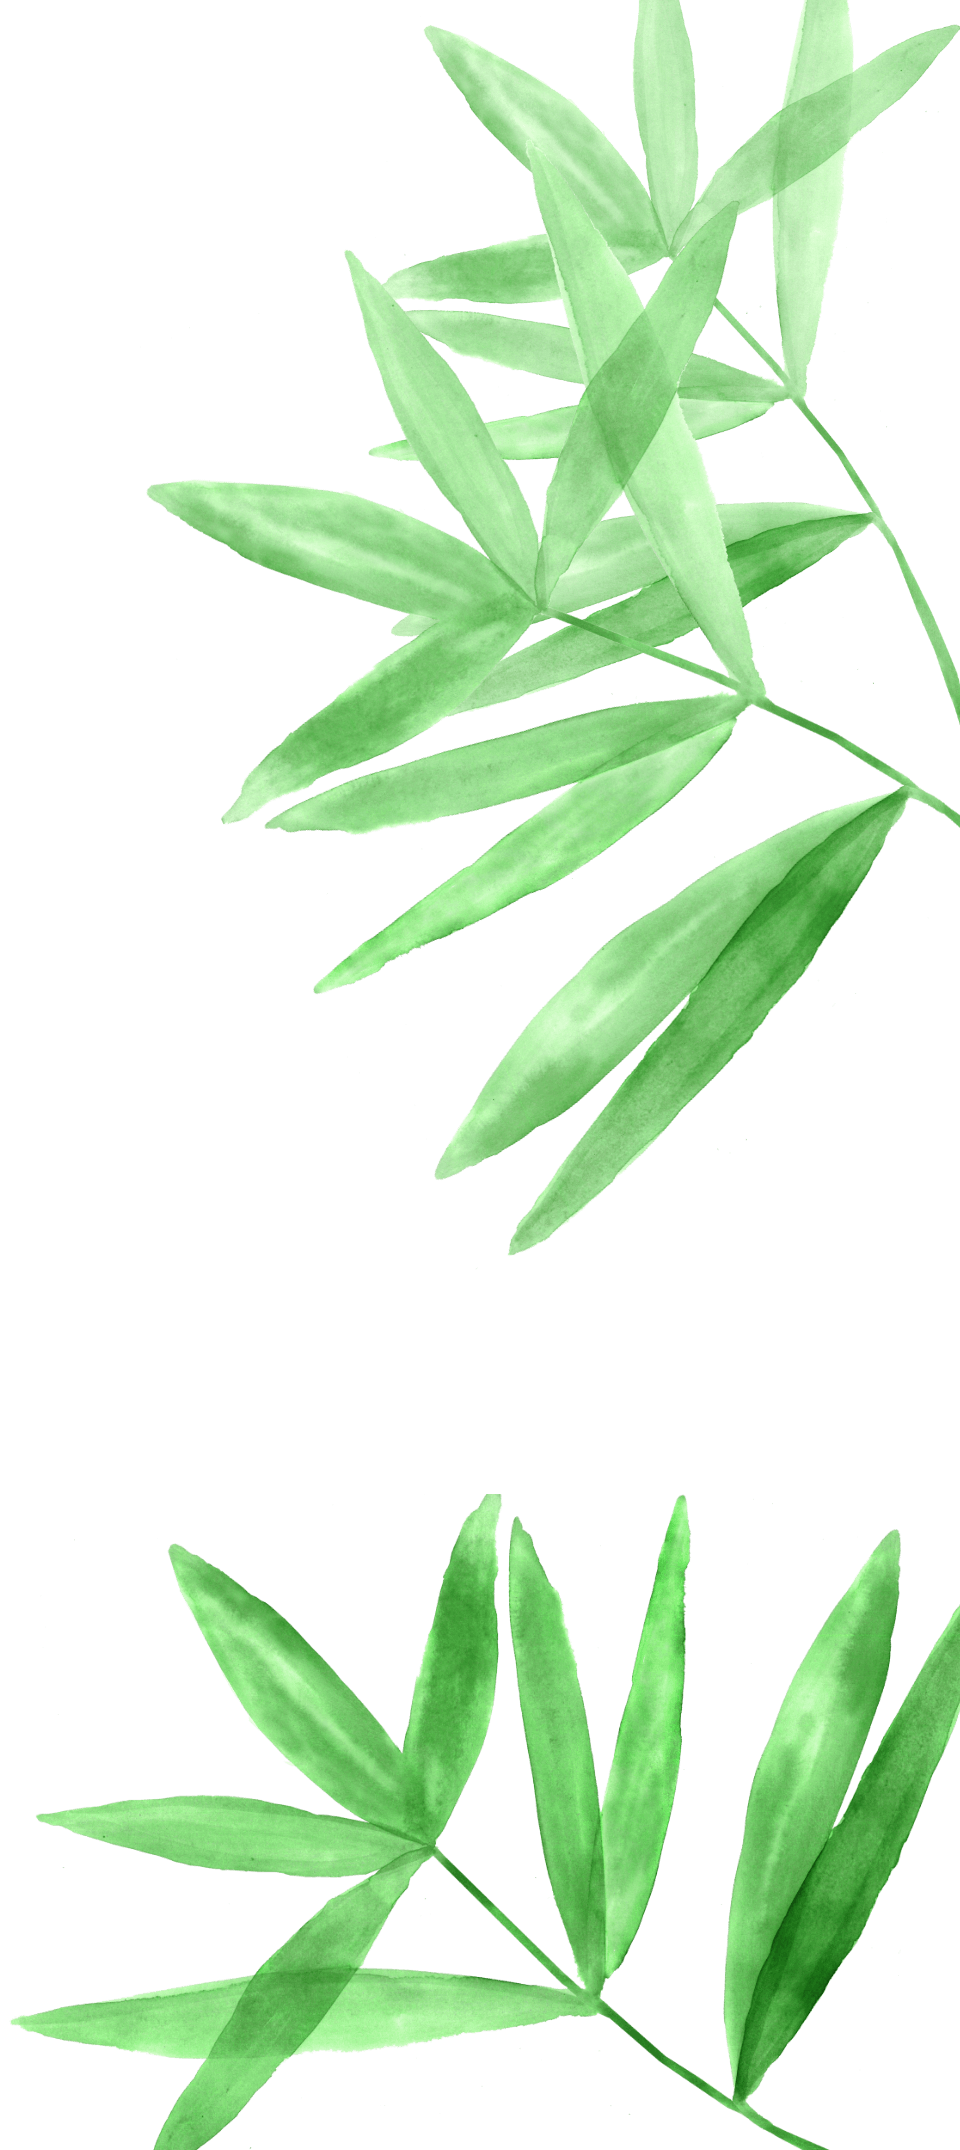 Watercolor illustration of leaves along the right side